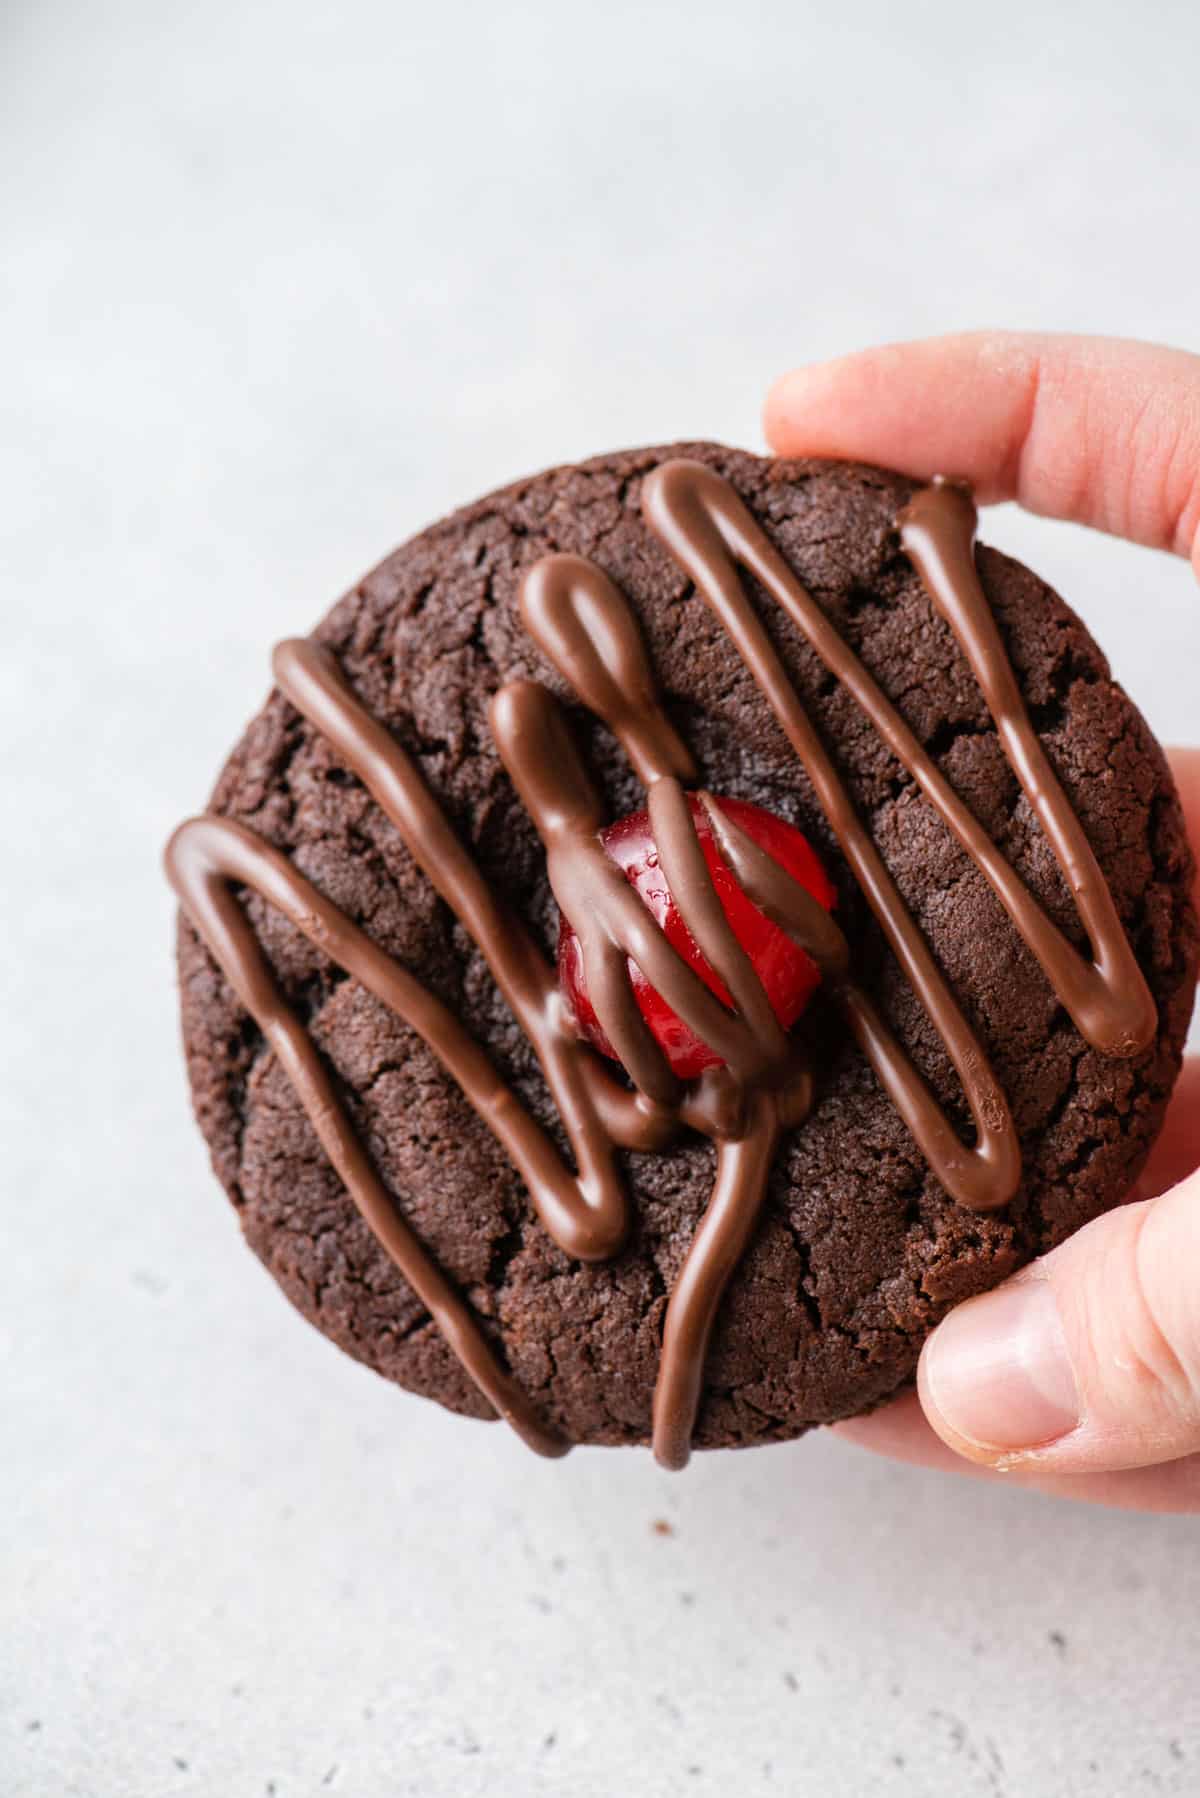 A hand holding a chocolate cherry cookie